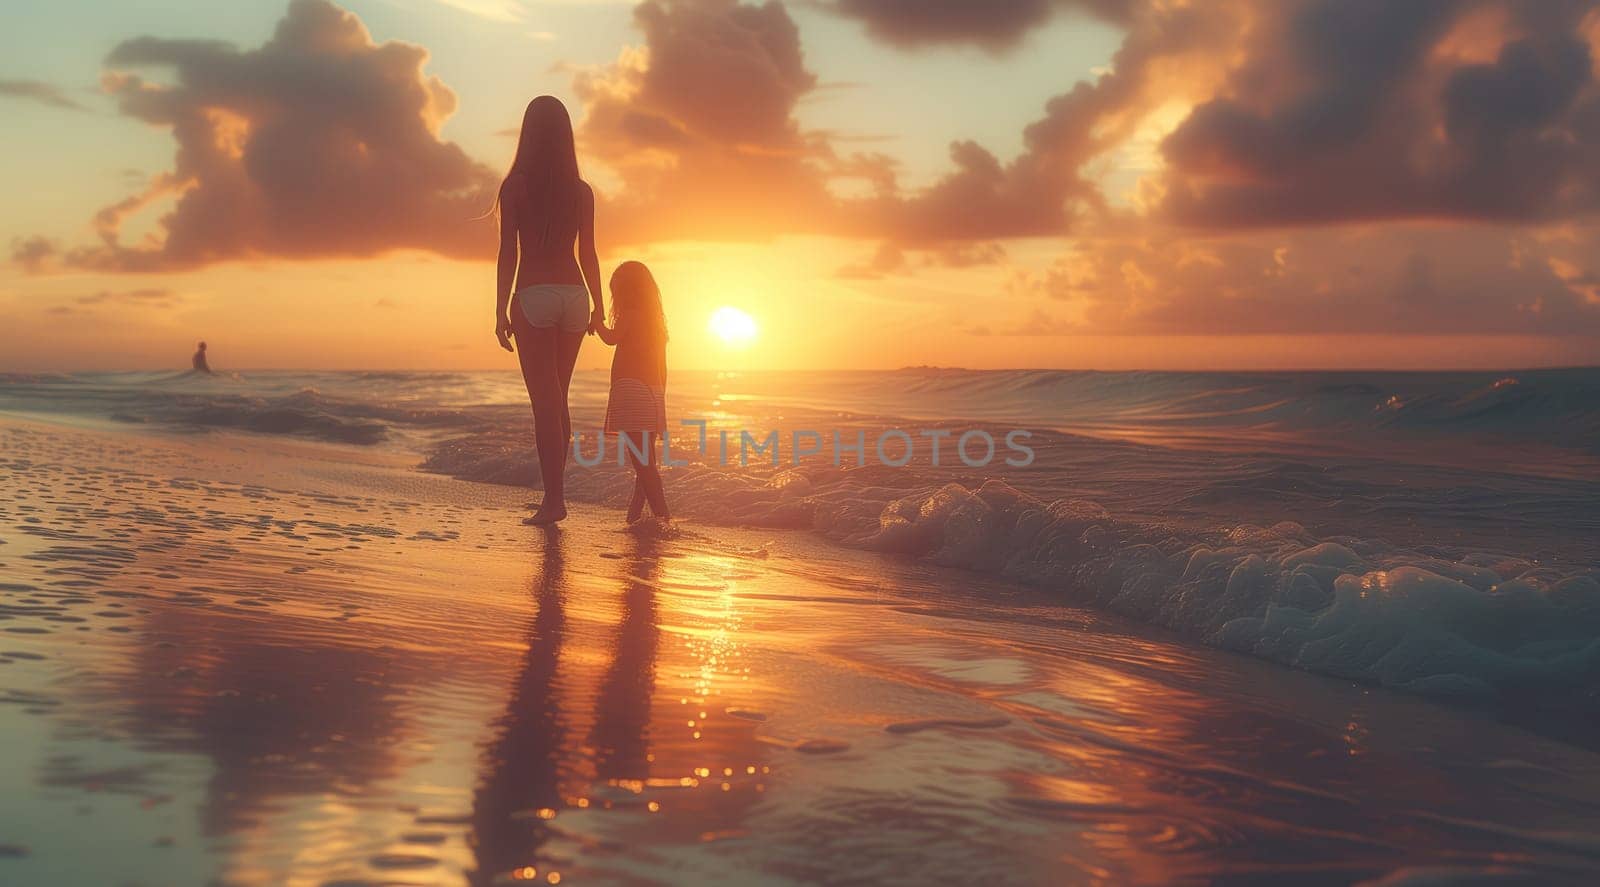 A woman and a child are strolling along the beach as the sun sets, with the sky filled with colorful clouds. The natural landscape of the horizon creates a peaceful dusk scene